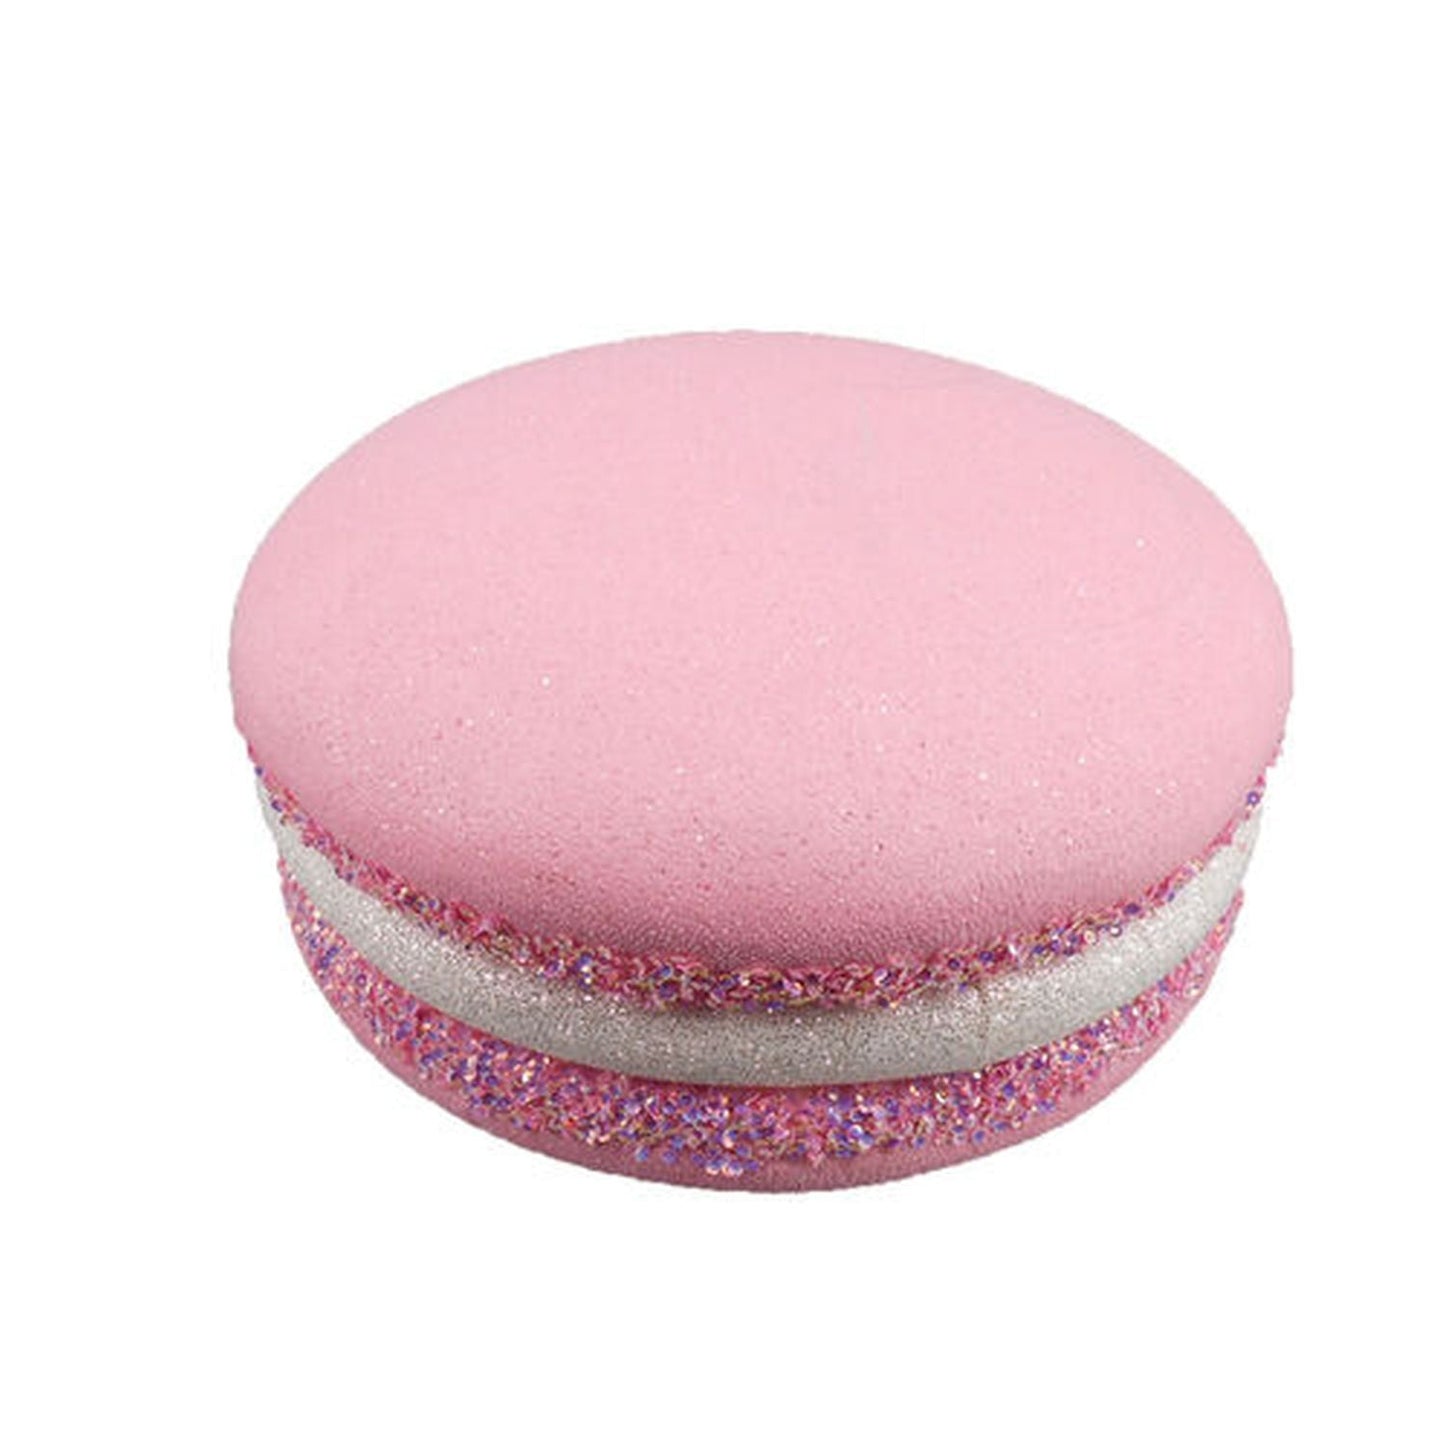 Cotton Candy Land 14" Macaron Cookie in Assorted Colors